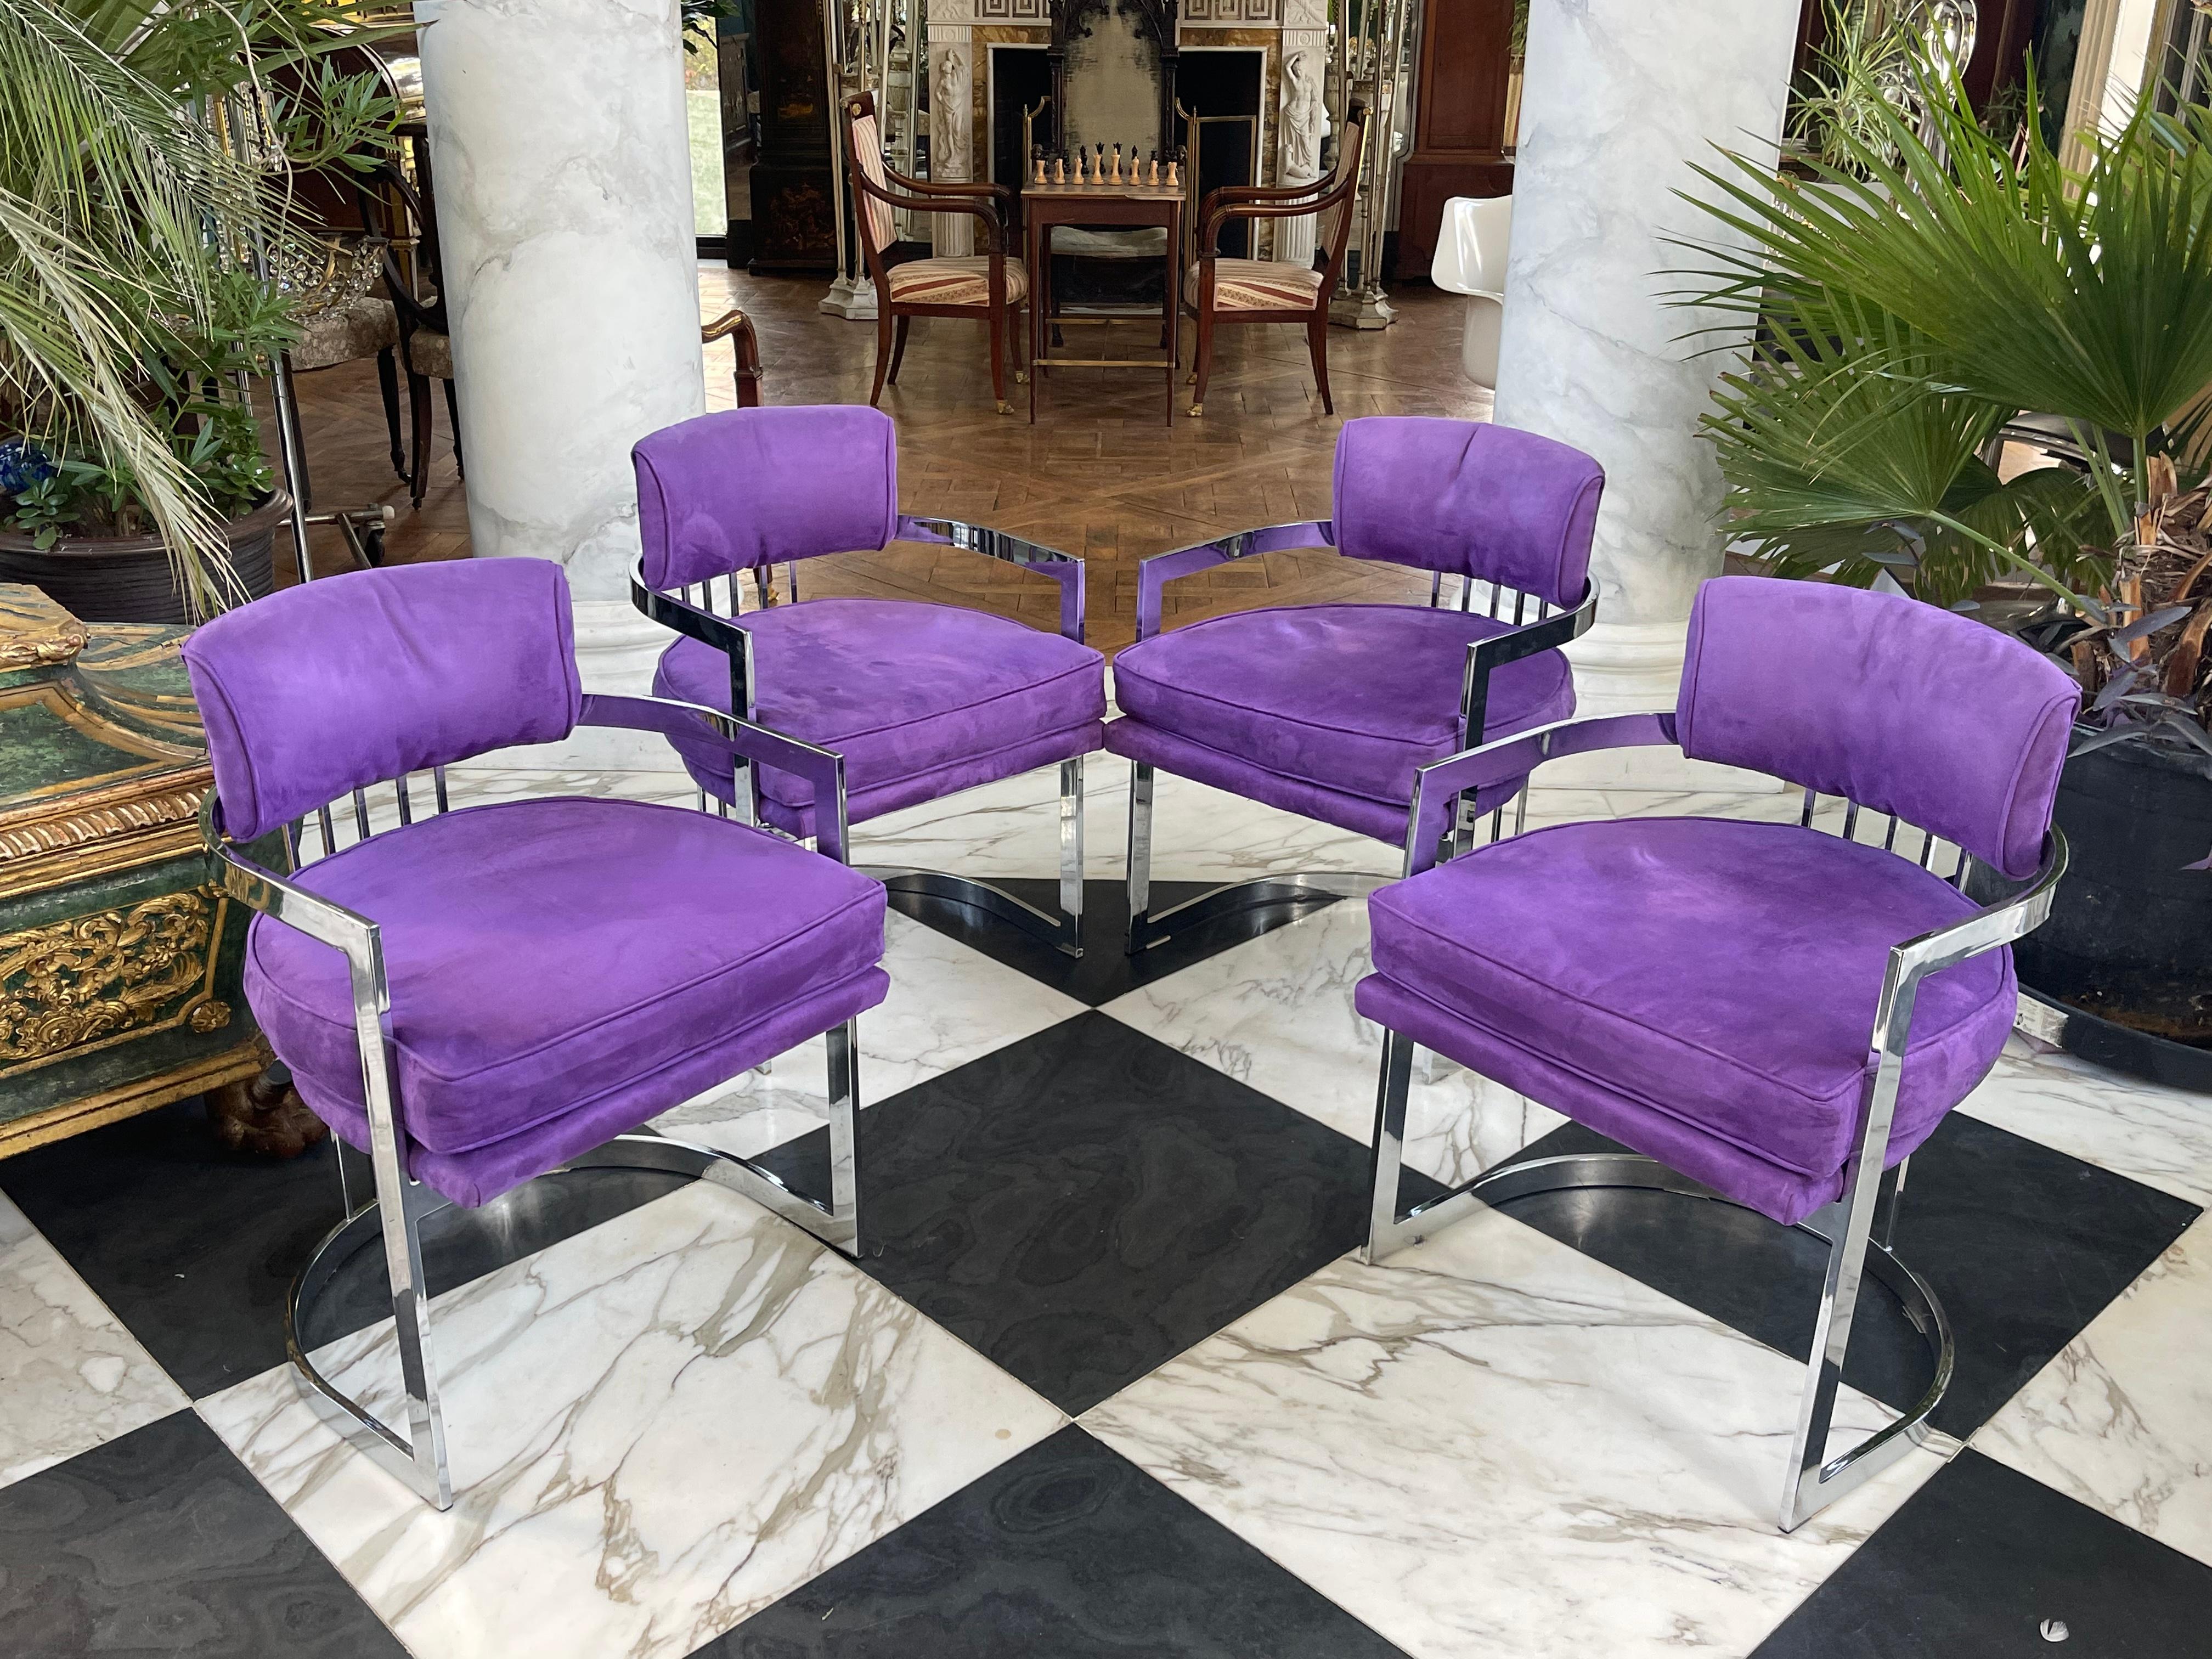 4 Milo Baughman Chrome Chairs in Purple Upholstery  In Good Condition For Sale In New Haven, CT